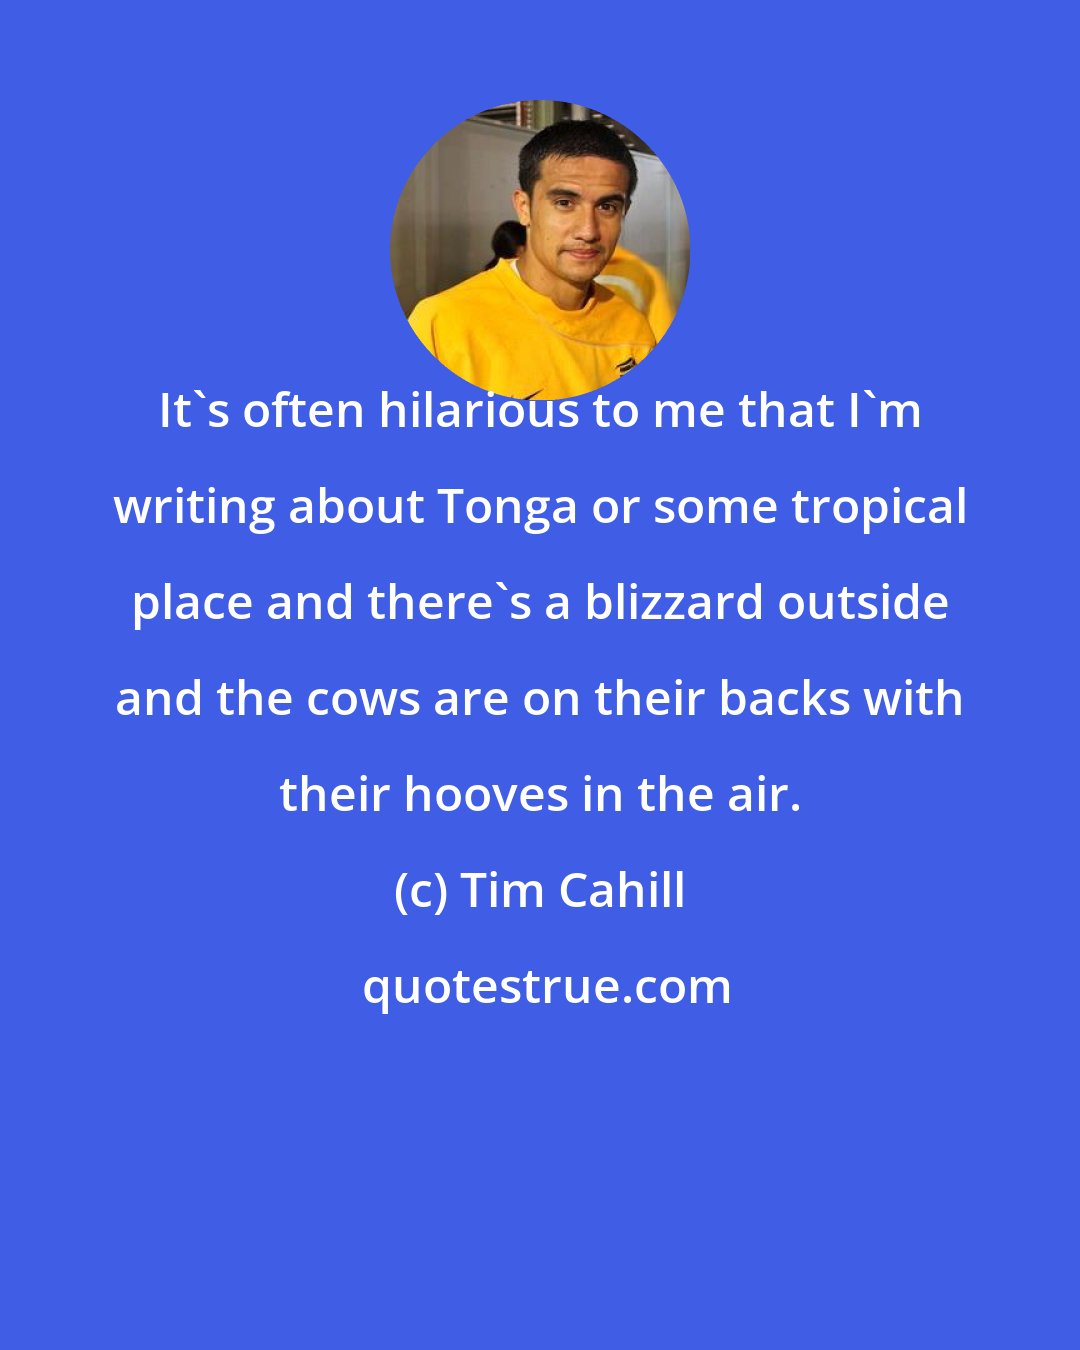 Tim Cahill: It's often hilarious to me that I'm writing about Tonga or some tropical place and there's a blizzard outside and the cows are on their backs with their hooves in the air.